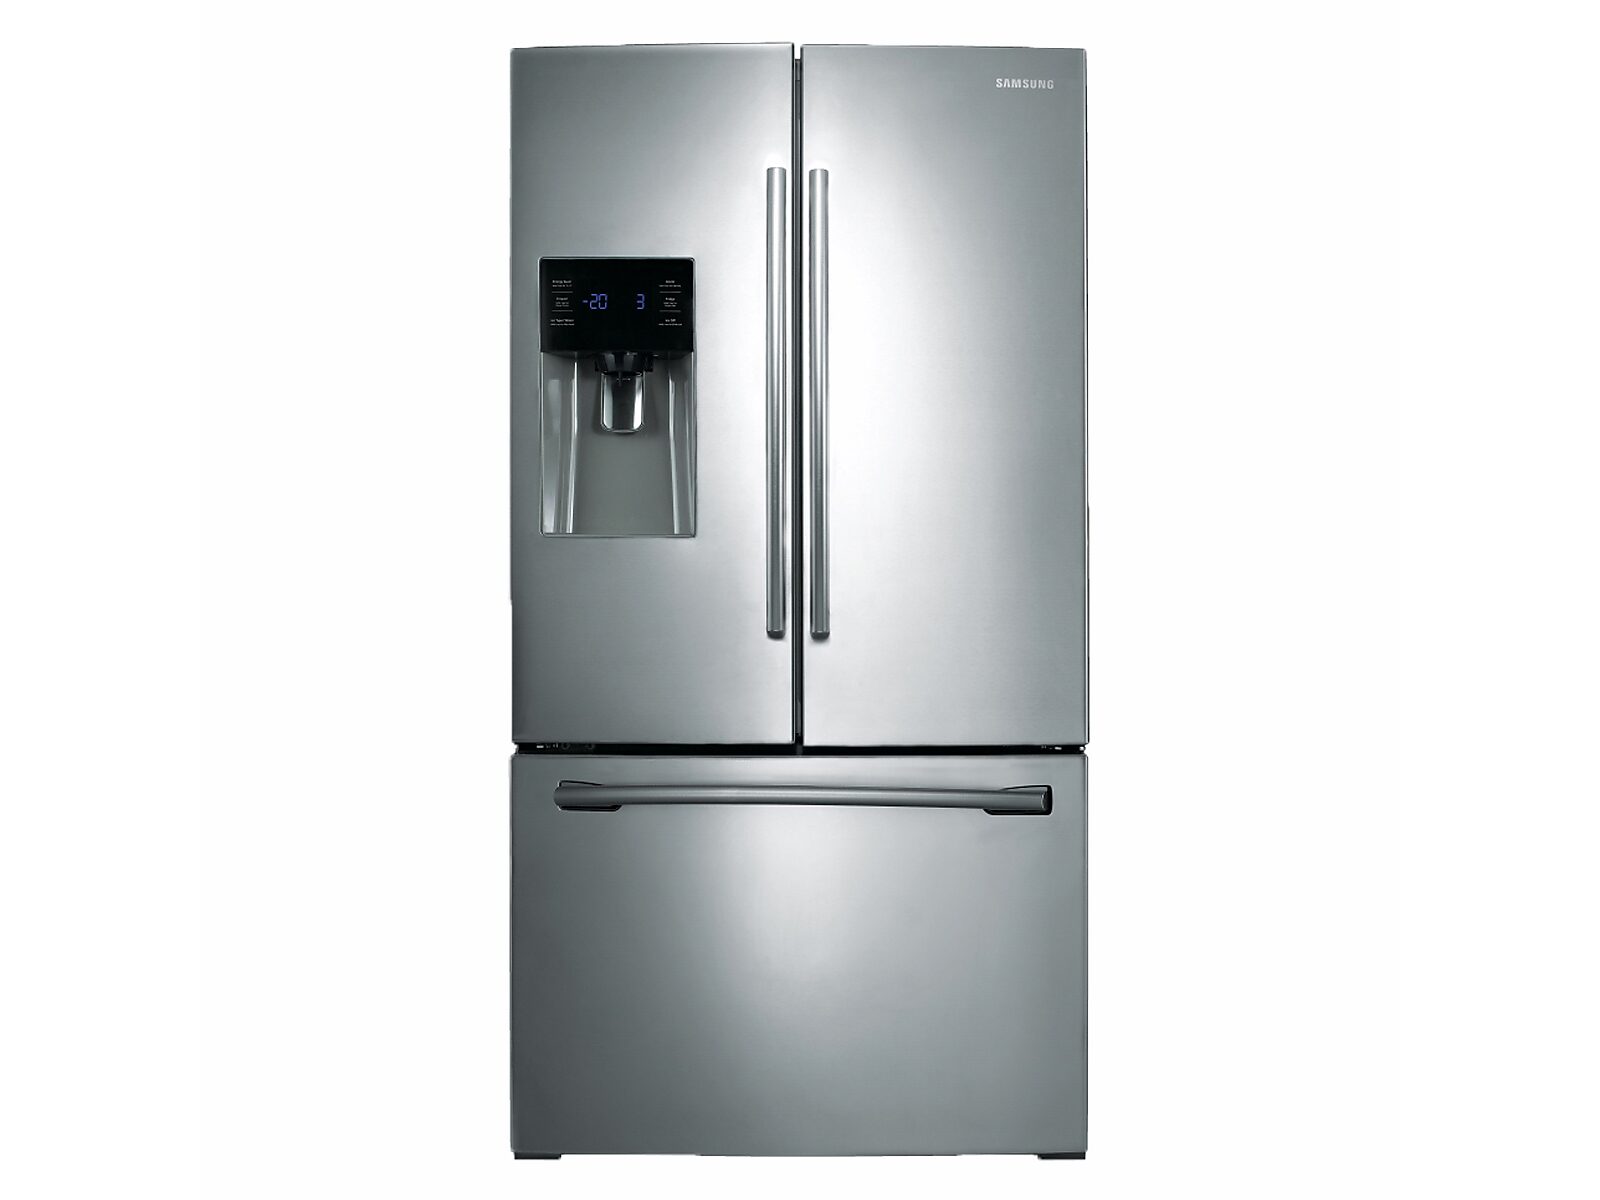 Samsung 25 cu. ft. French Door Refrigerator with External Water & Ice Dispenser in Stainless Steel(RF263BEAESR/AA) photo